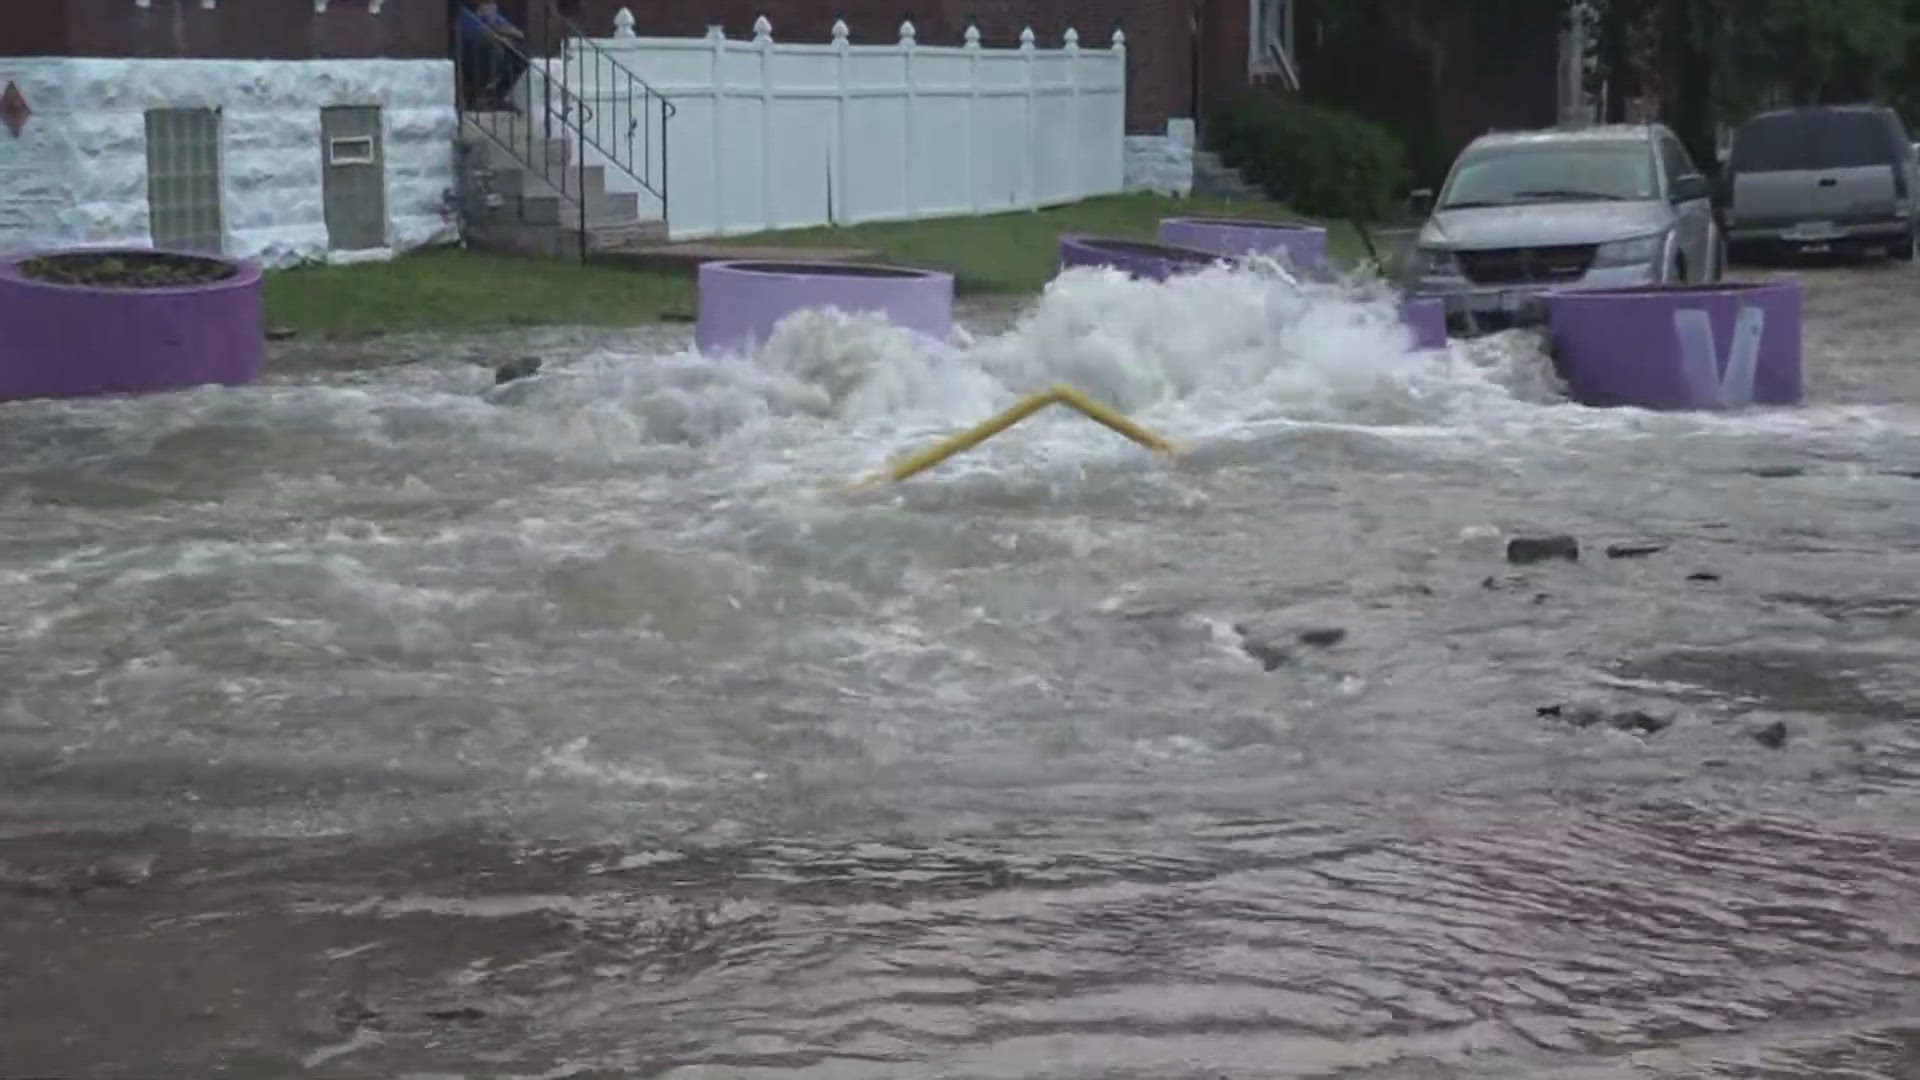 A massive water main break happened Friday morning at the corner of Penrose Street and Blair Avenue. No word yet on any boil orders in connection to the break.